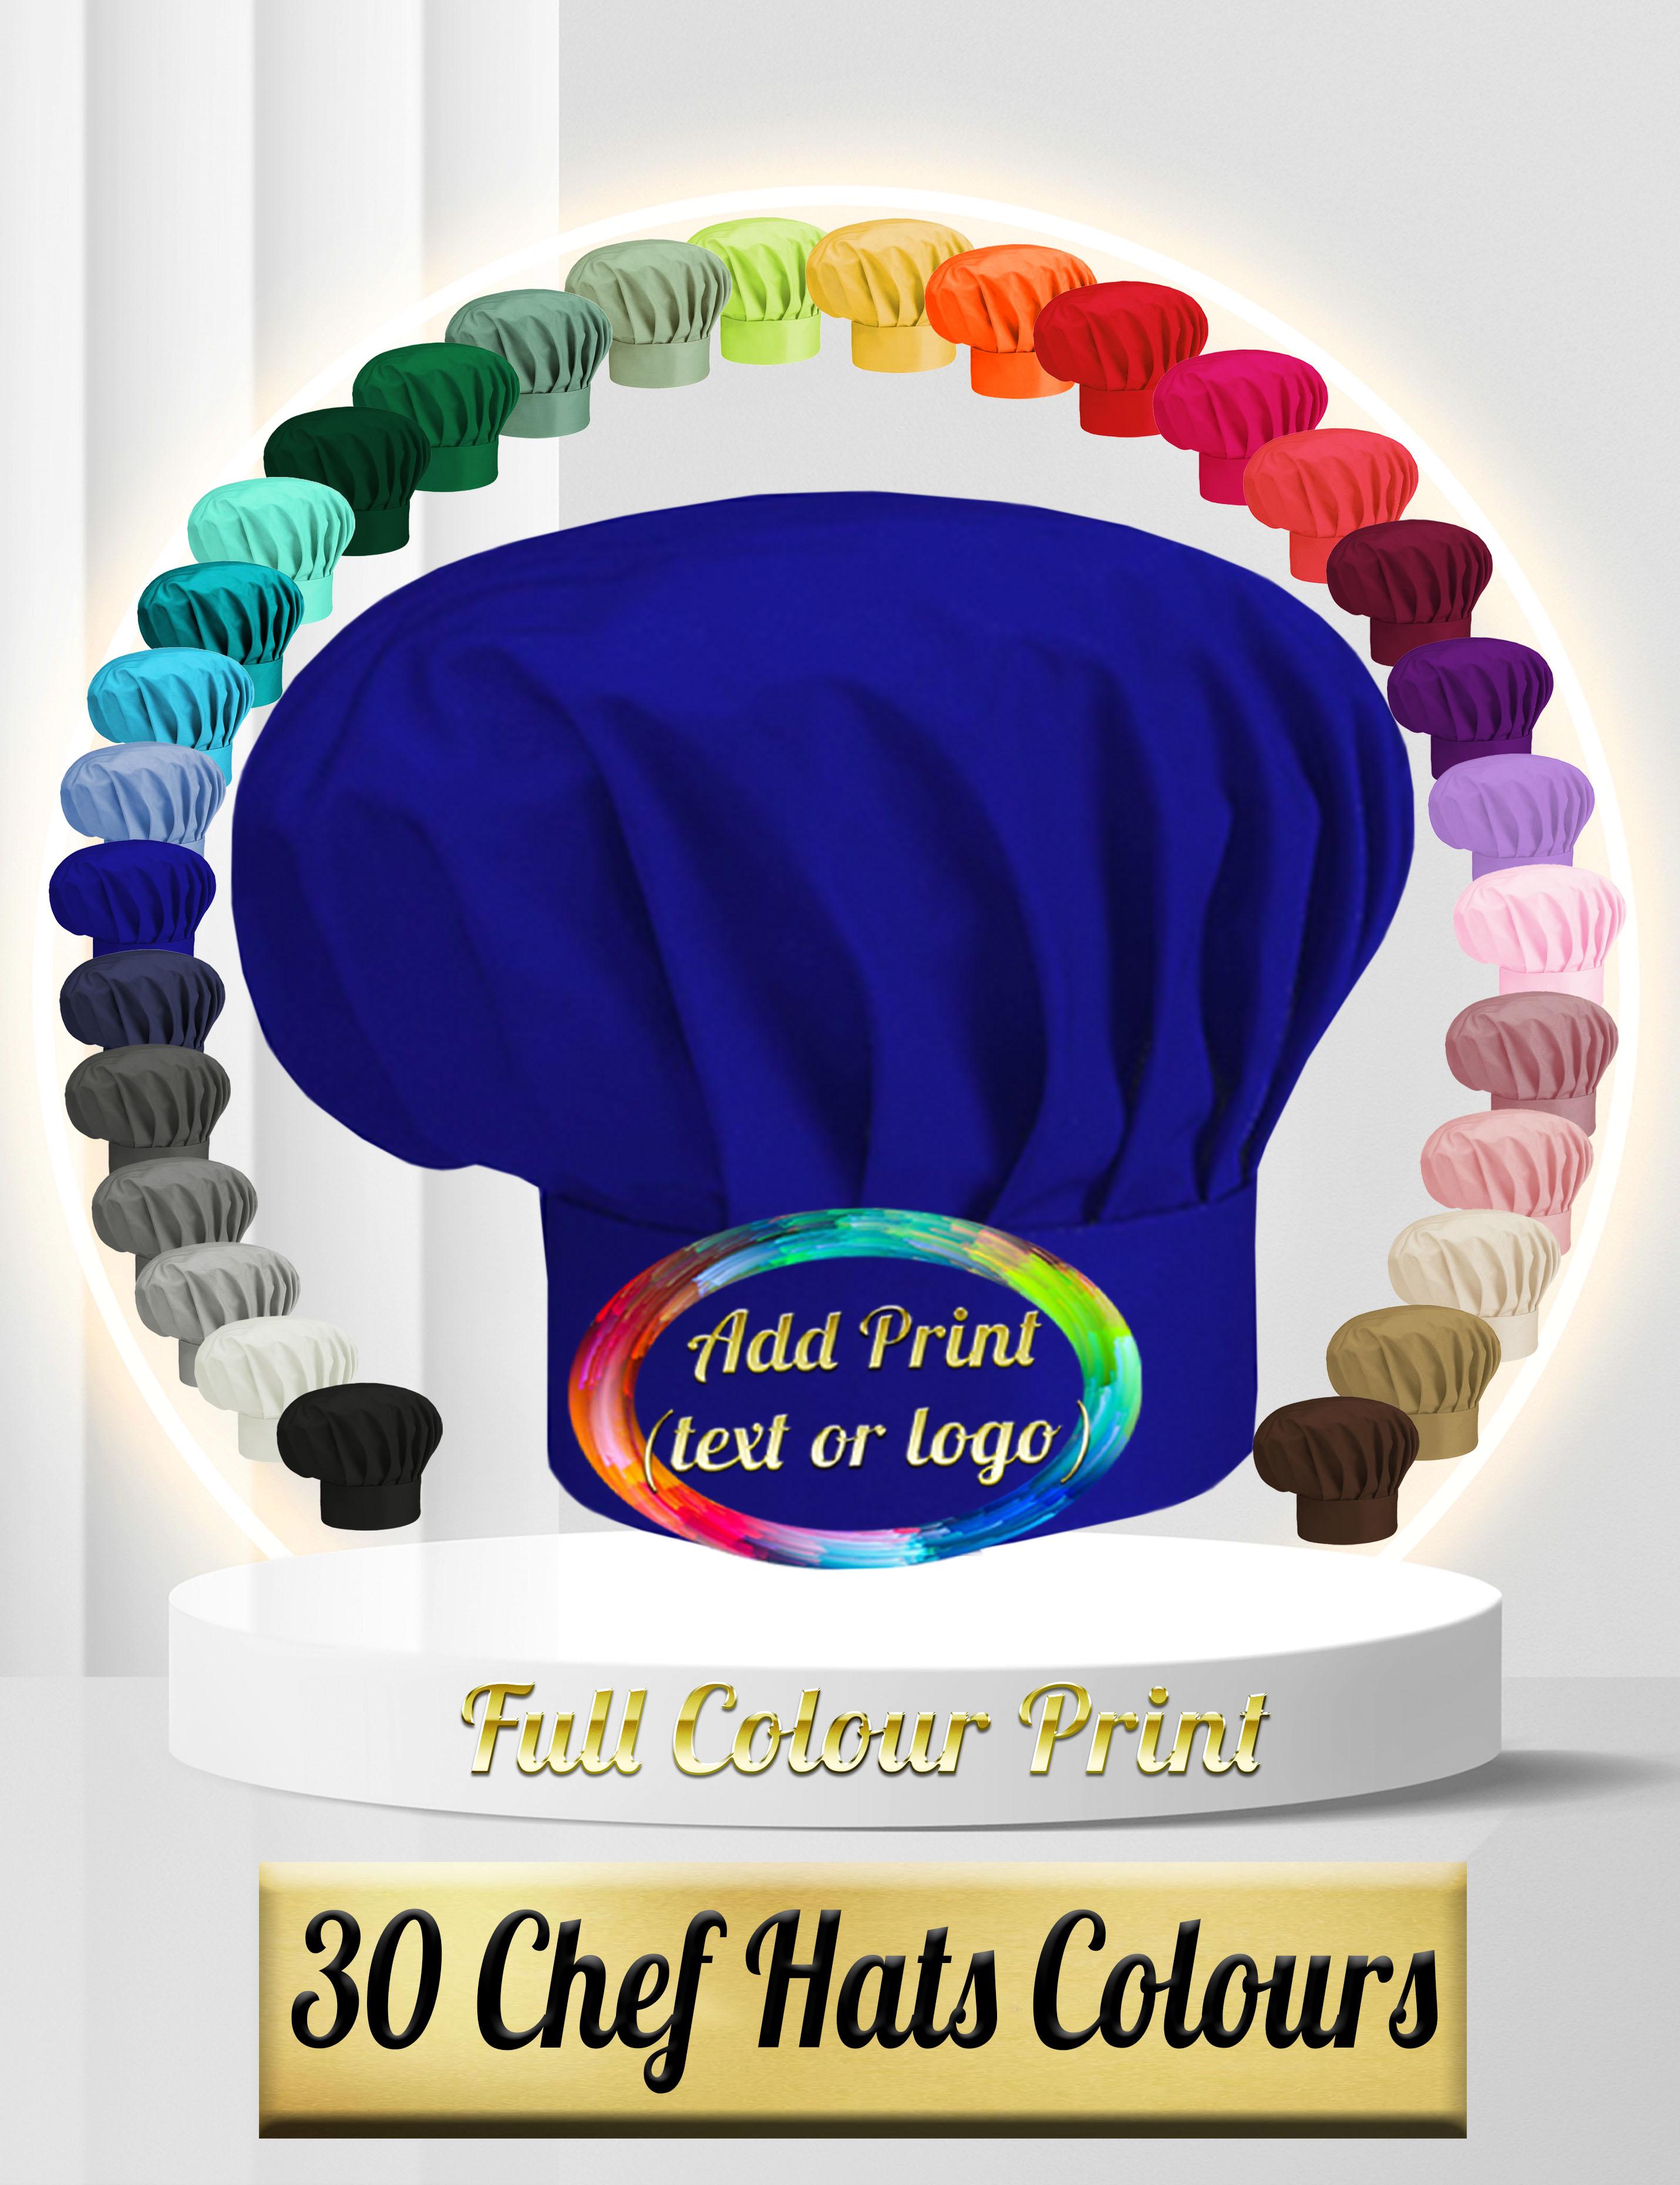 Full colour printed chef hat